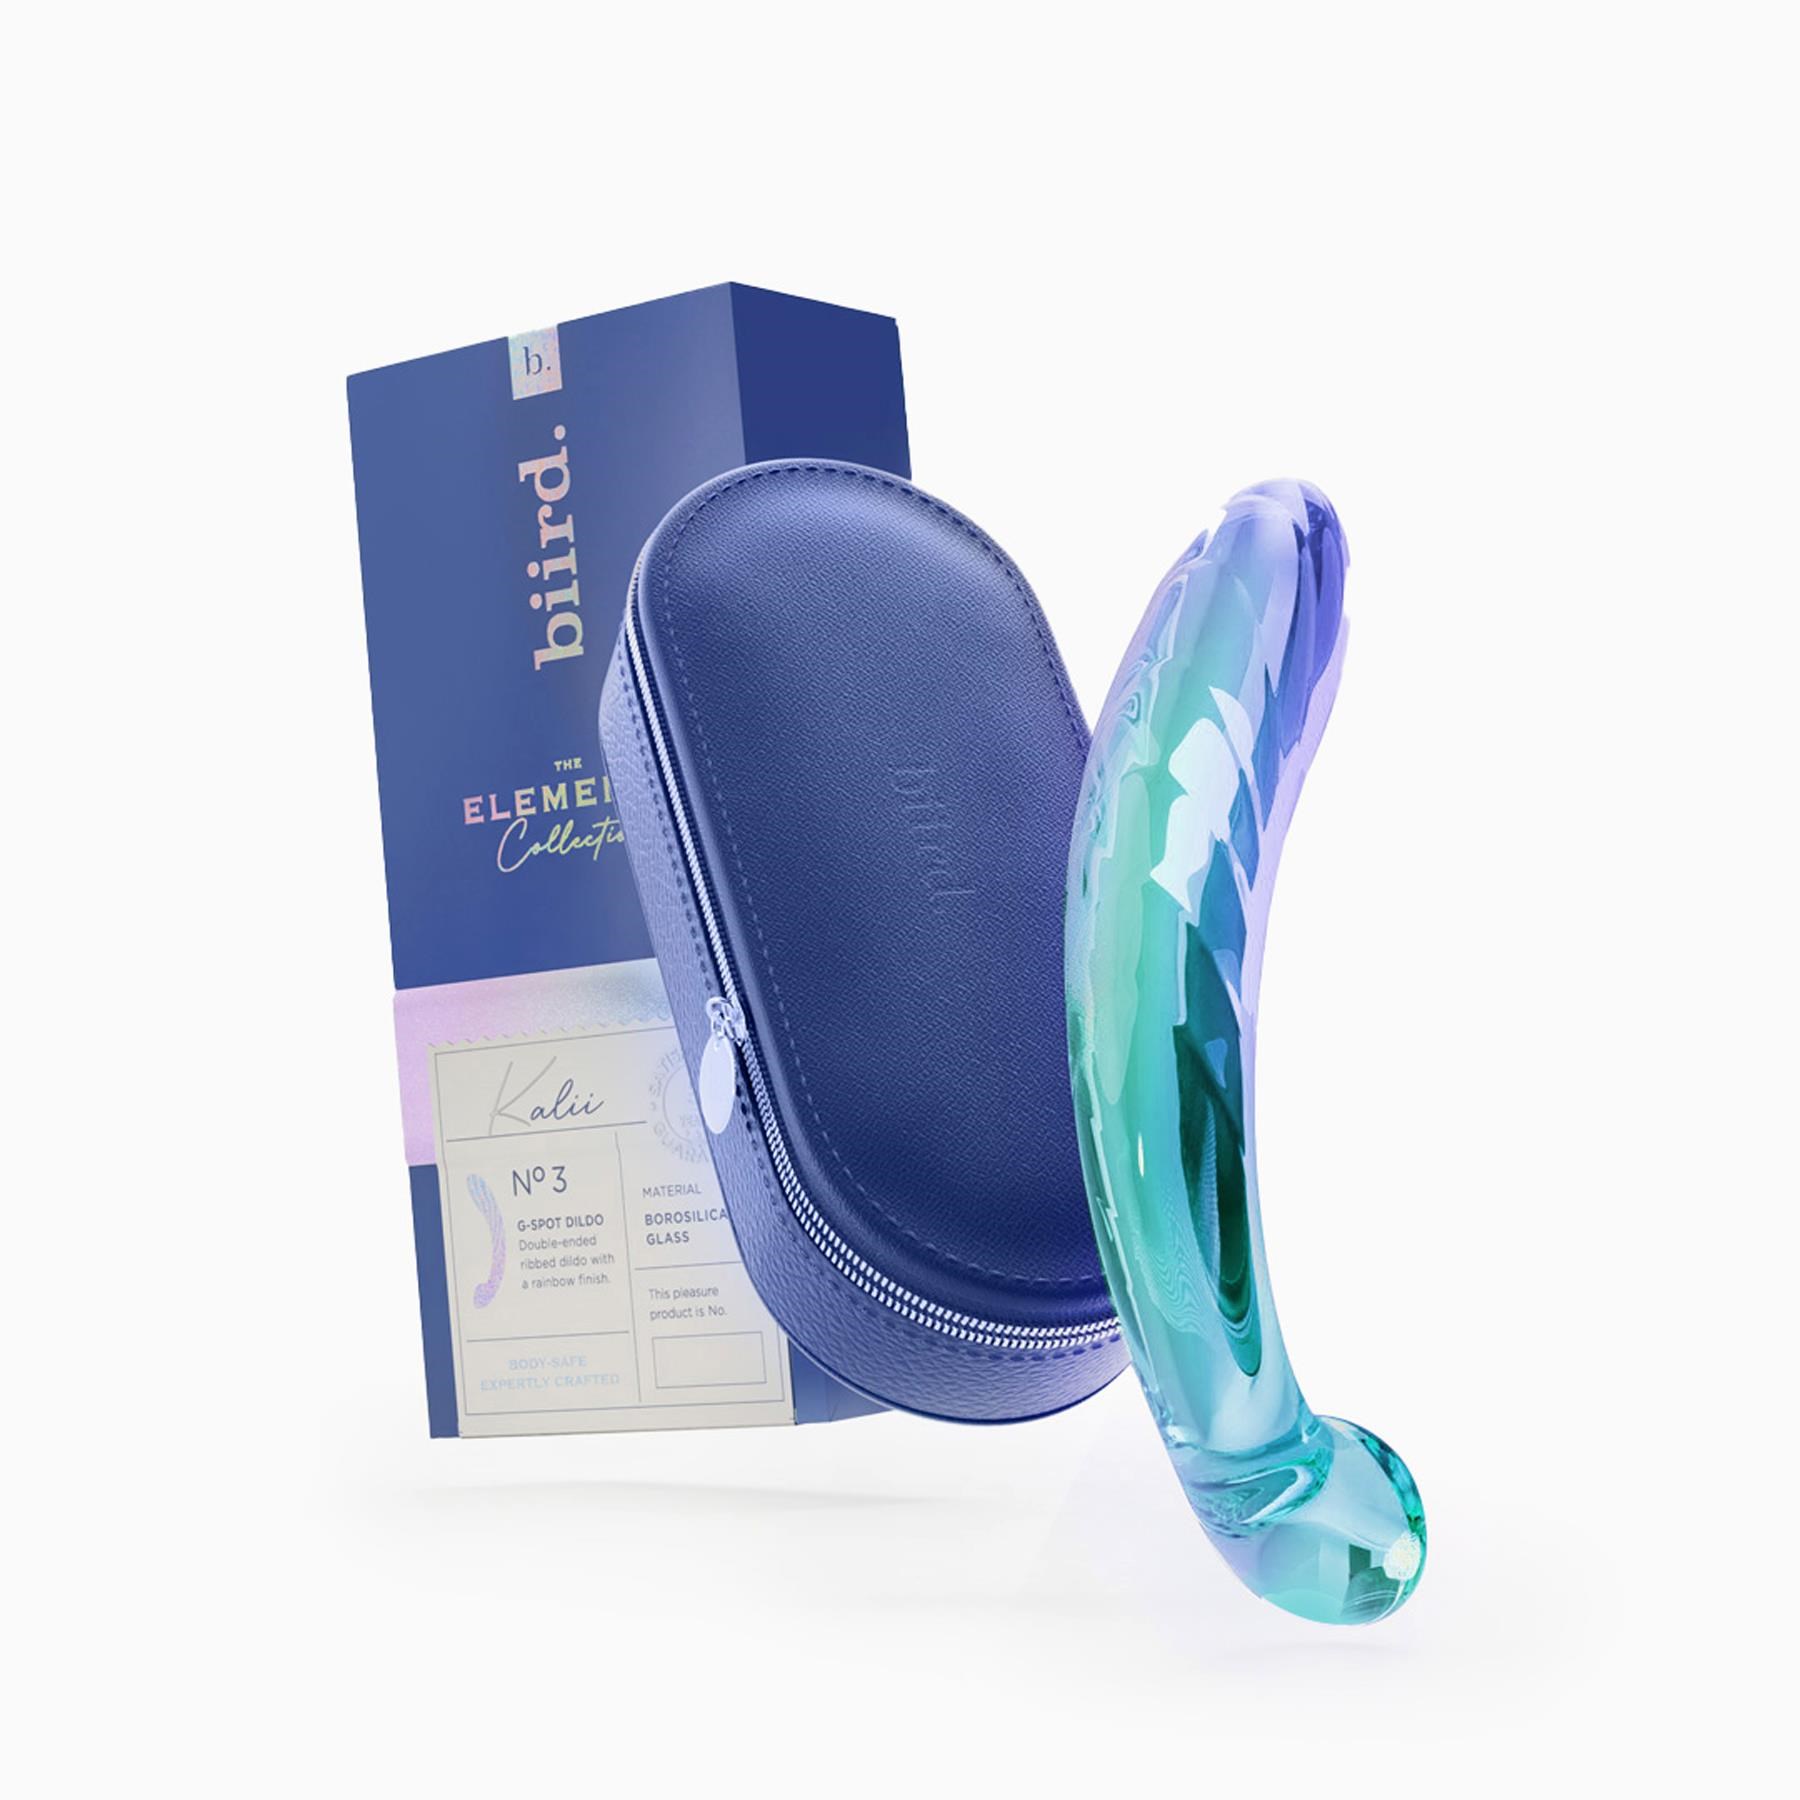 Biird Kalii Glass G-Spot Dildo - Product and Packaging